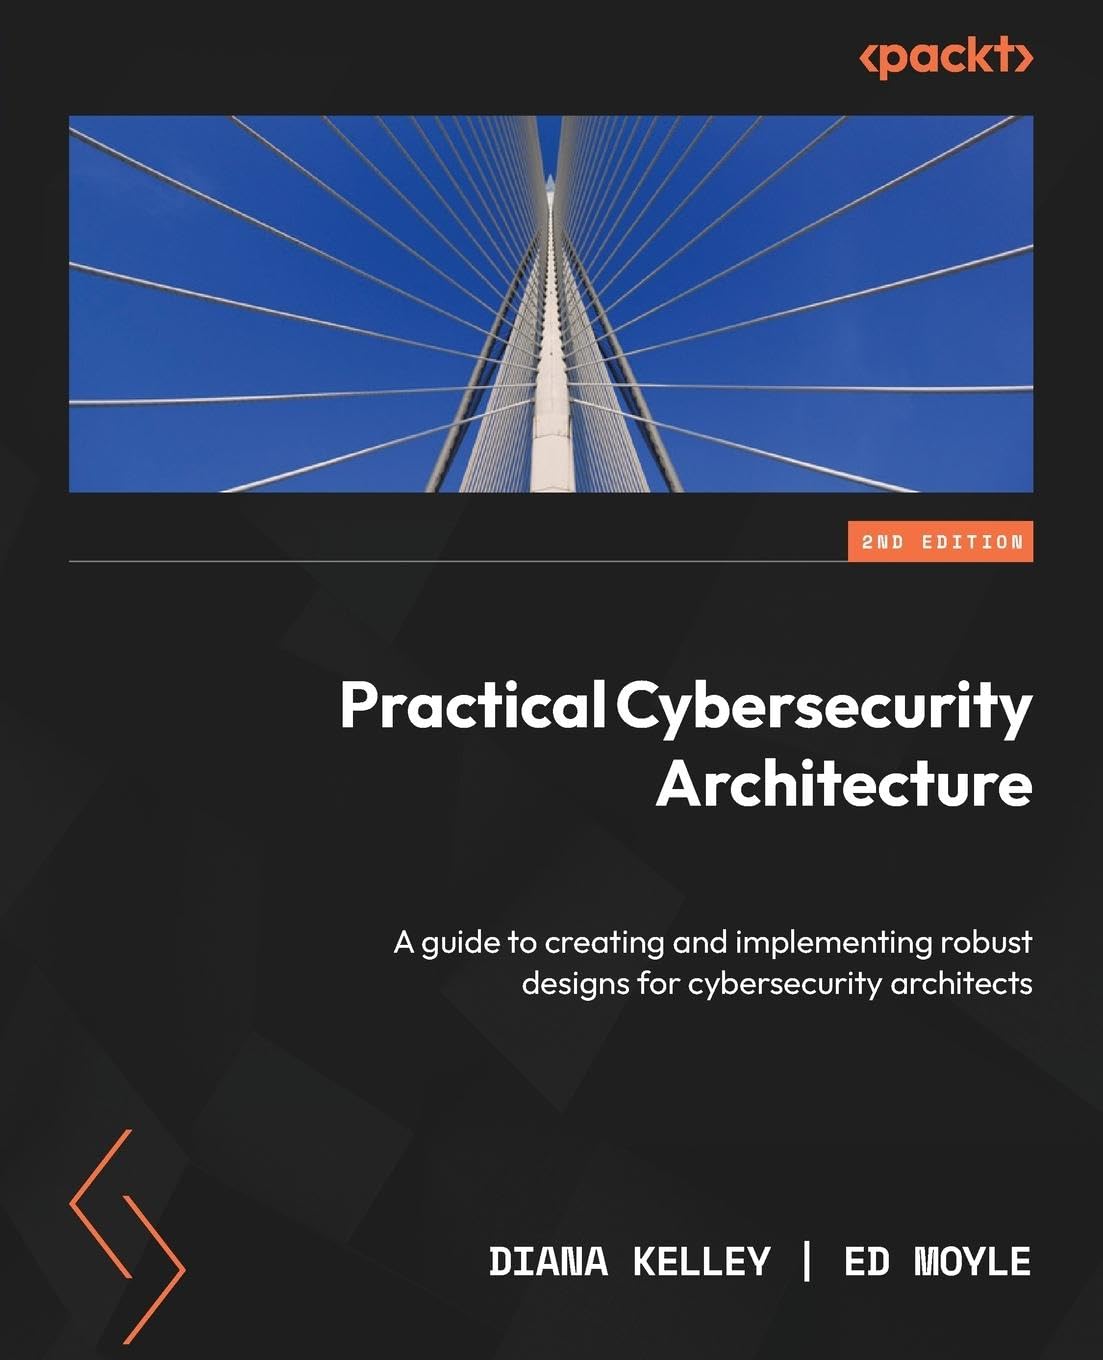 (EBook PDF)Practical Cybersecurity Architecture: A guide to creating and implementing robust designs for cybersecurity architects, 2nd Edition by Diana Kelley, Ed Moyle